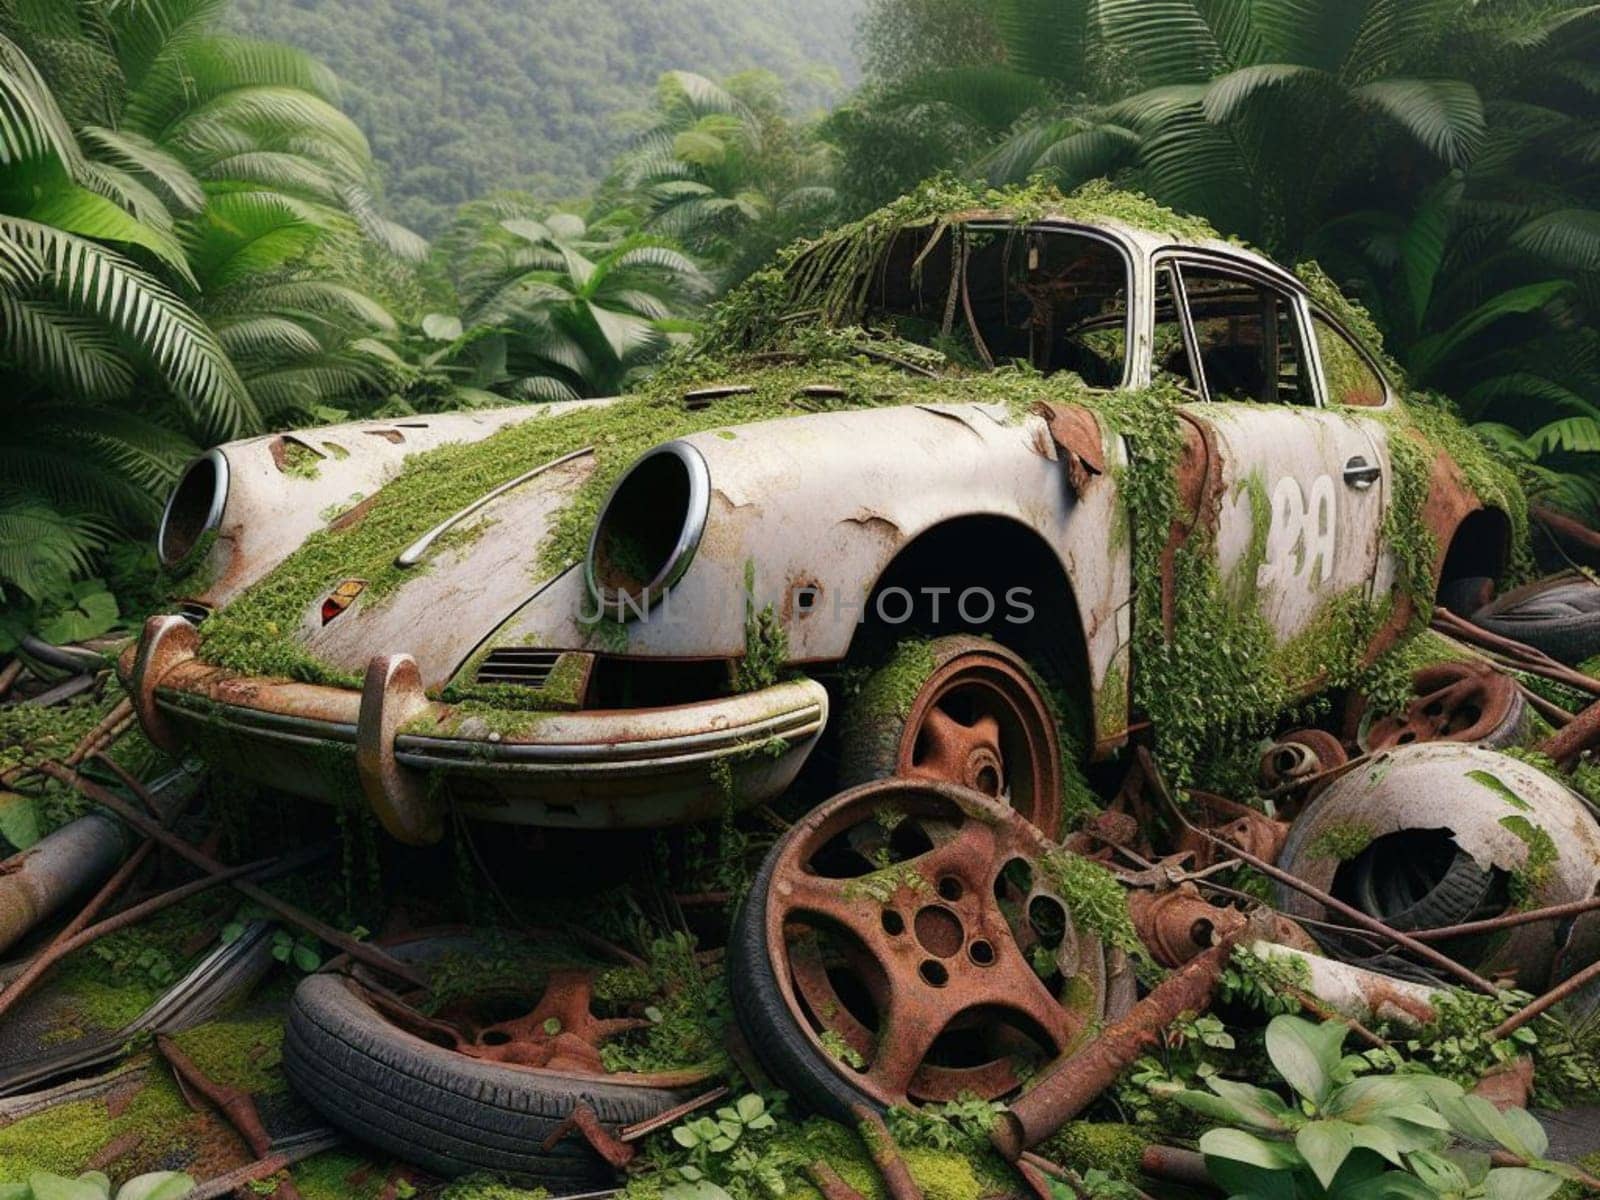 Abandoned rusty expensive atmospheric super car as circulation banned for co2 emission 2030 agenda , severe damage, broken parts, plants overgrowth bloom flowers. ai generated